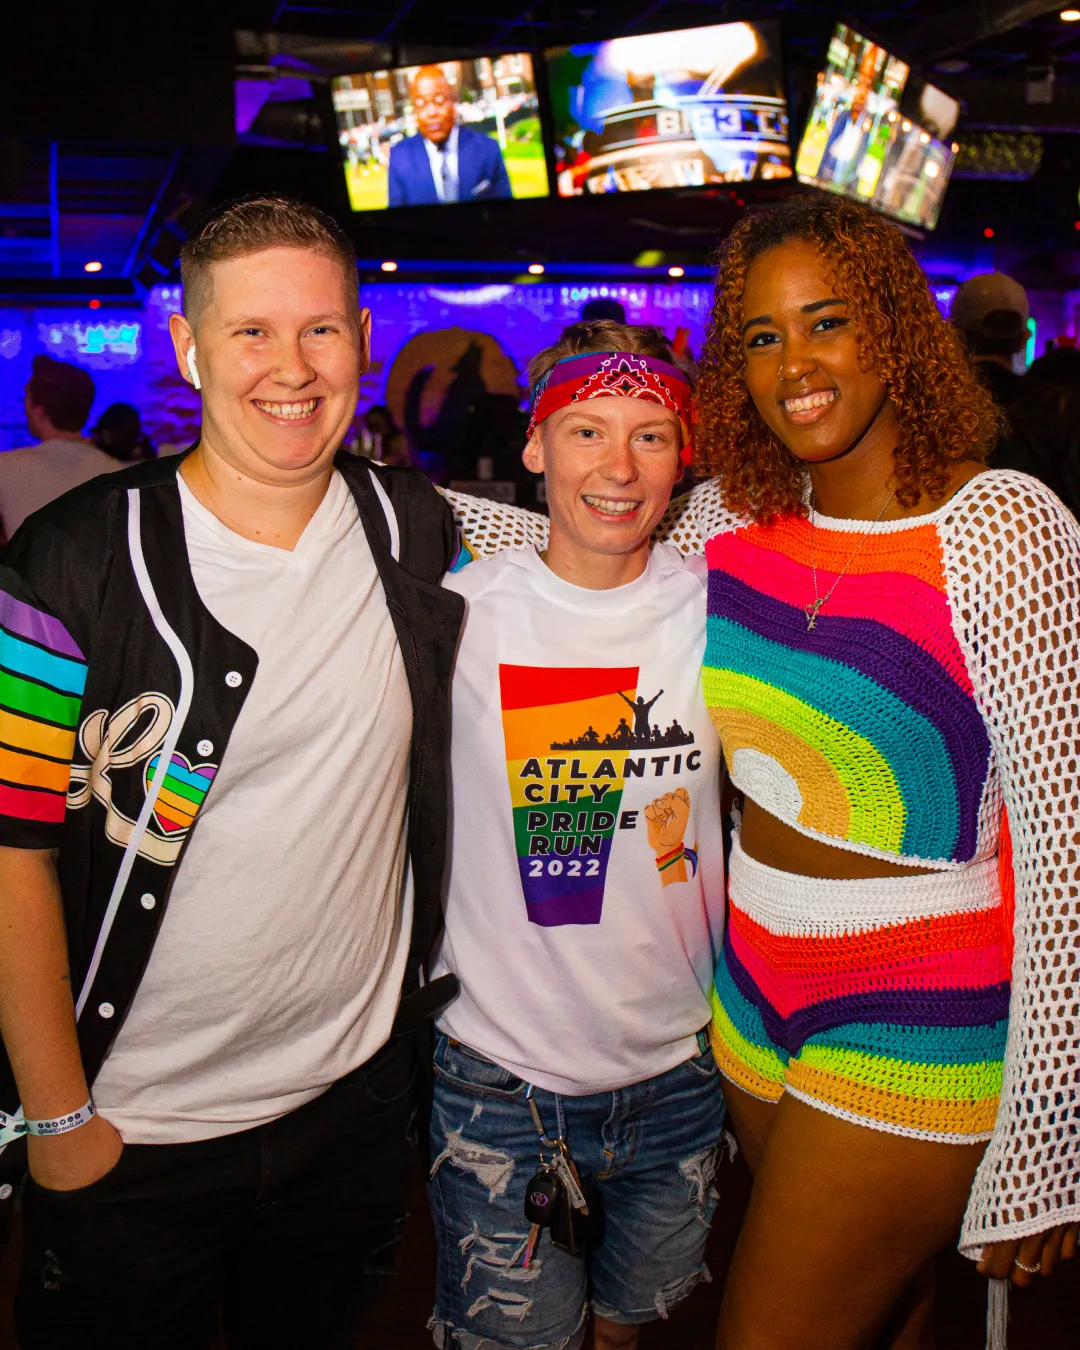 Friends capturing memories with rainbow-themed outfits at the Pride Bar Crawl
